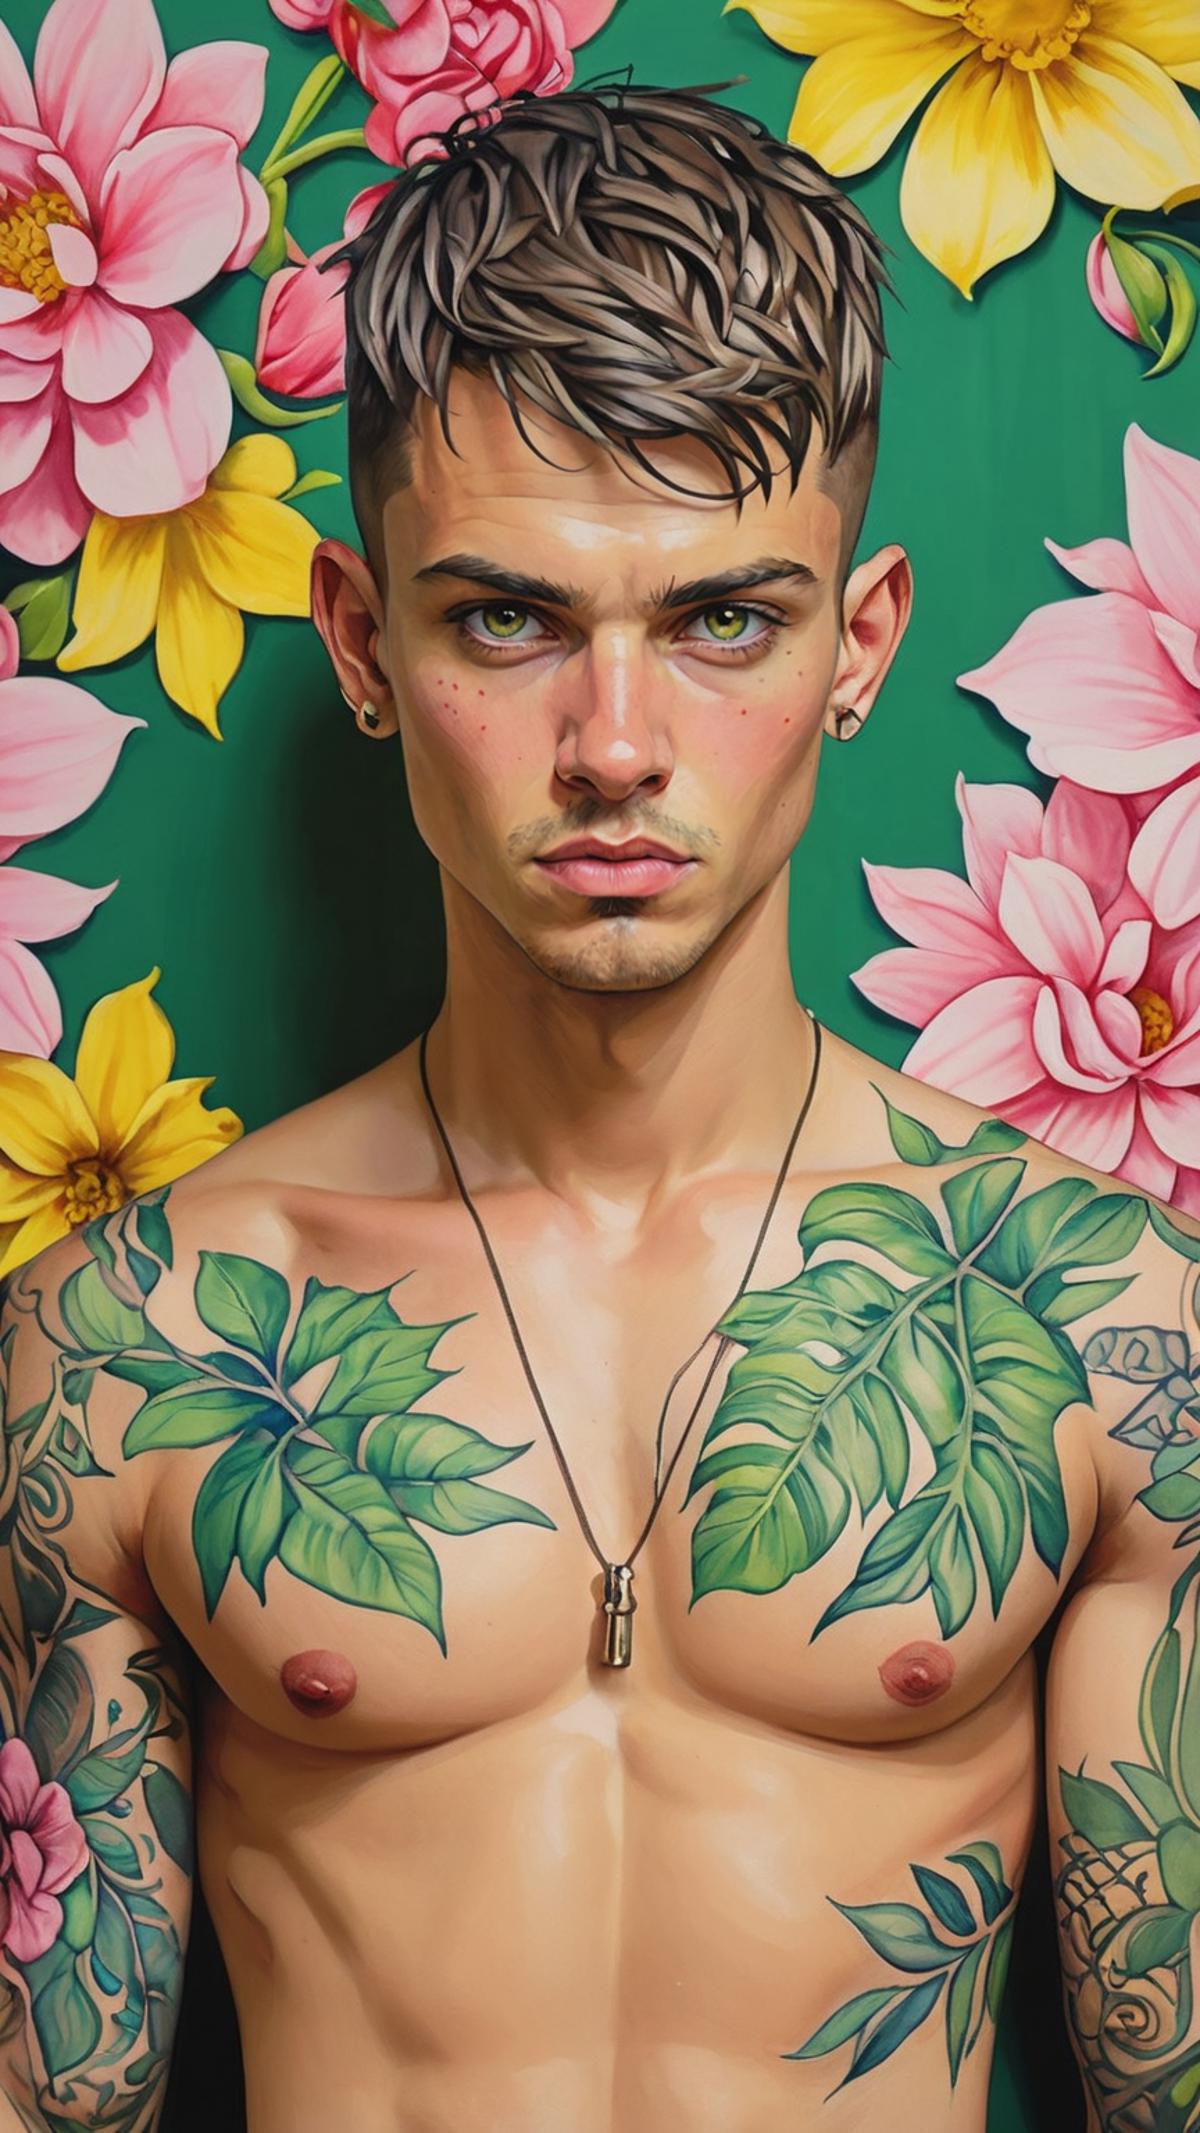 A young man with green eyes, tattoos, and a necklace poses for a portrait.